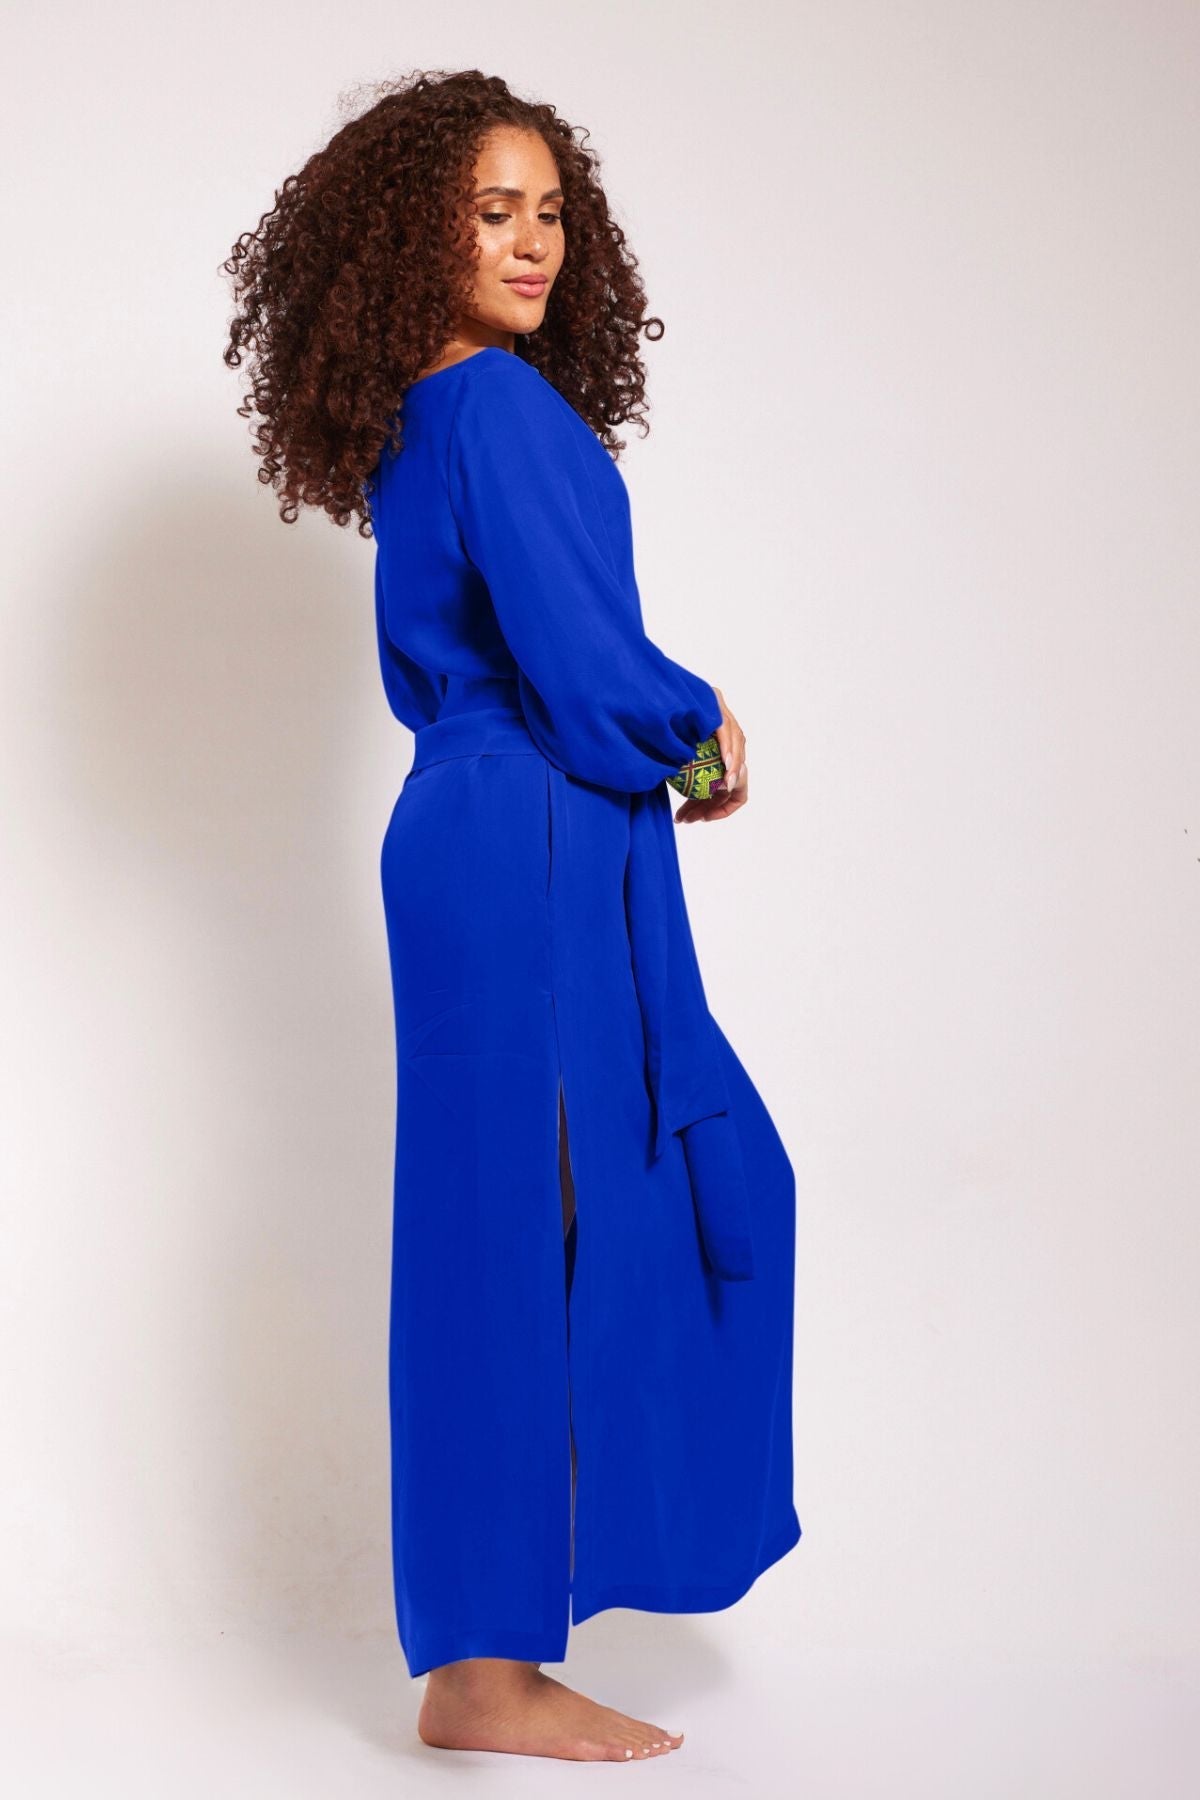 side view of woman wearing a royal blue kaftan duster with embroidered sleeves made from recycled materials